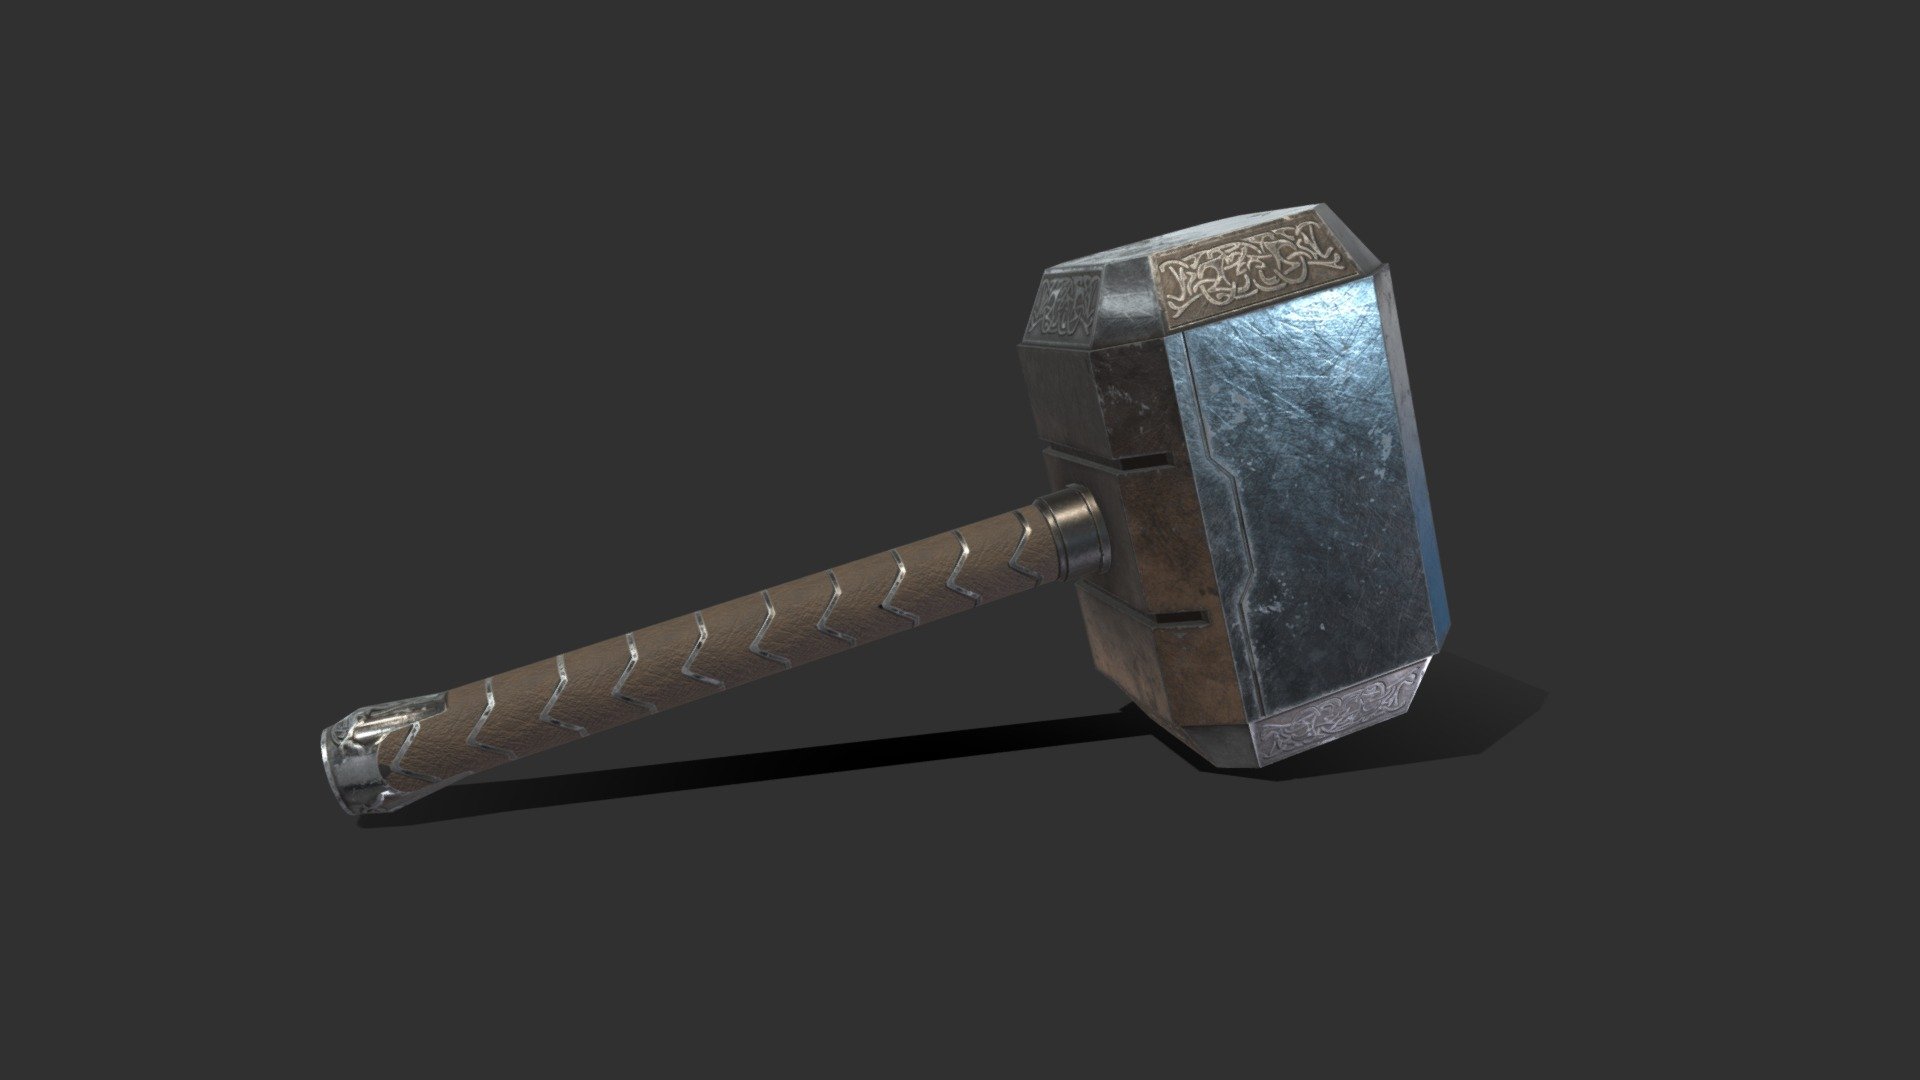 3D model of Thor Hammer Low Poly PBR
- 4k Resolution of textures
- Originally created with 3ds Max 2018 
- Textured created with Substance Painter 


Texture Set: 
Diffuse, Base Color, IOR, gloss, heigh, ior, normal, reflection, specular, AO, metallic, roughness
Special notes: 
.fbx format is recommended for import in other 3d software. If your software doesn't support .fbx format, please use 3ds format; .obj, format was exported from 3ds Max. 
The geometry for .obj format is set to tris.
 - Thor Hammer Low Poly PBR - Buy Royalty Free 3D model by danielmikulik 3d model